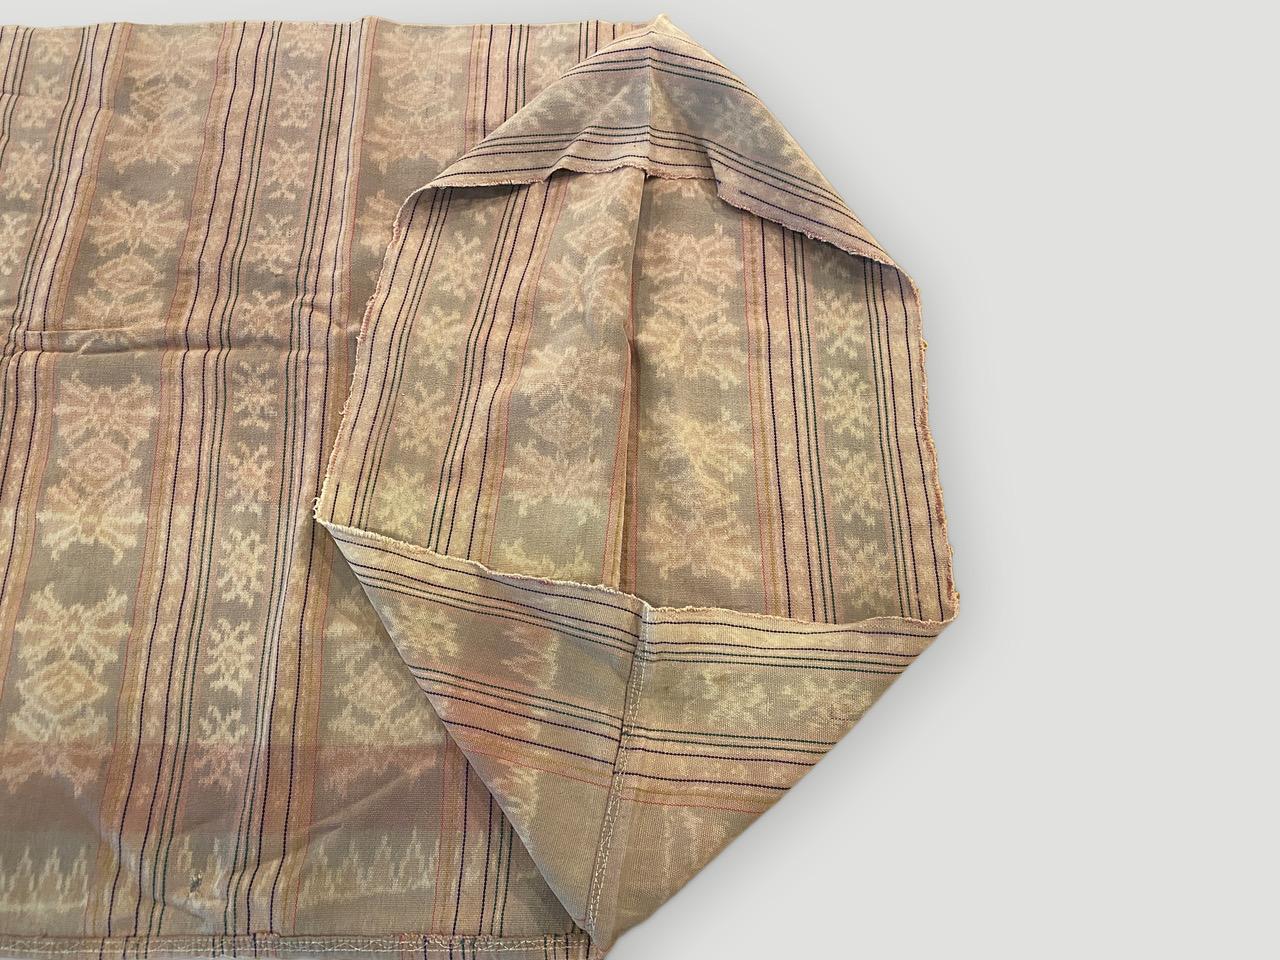 Beautiful antique sarong from Sumatra. There are so many uses for this soft dusty pink cotton handwoven textile. This sarong is sewn into a circle to step into and roll around the waist to be worn. Opened the size is 64” x 50